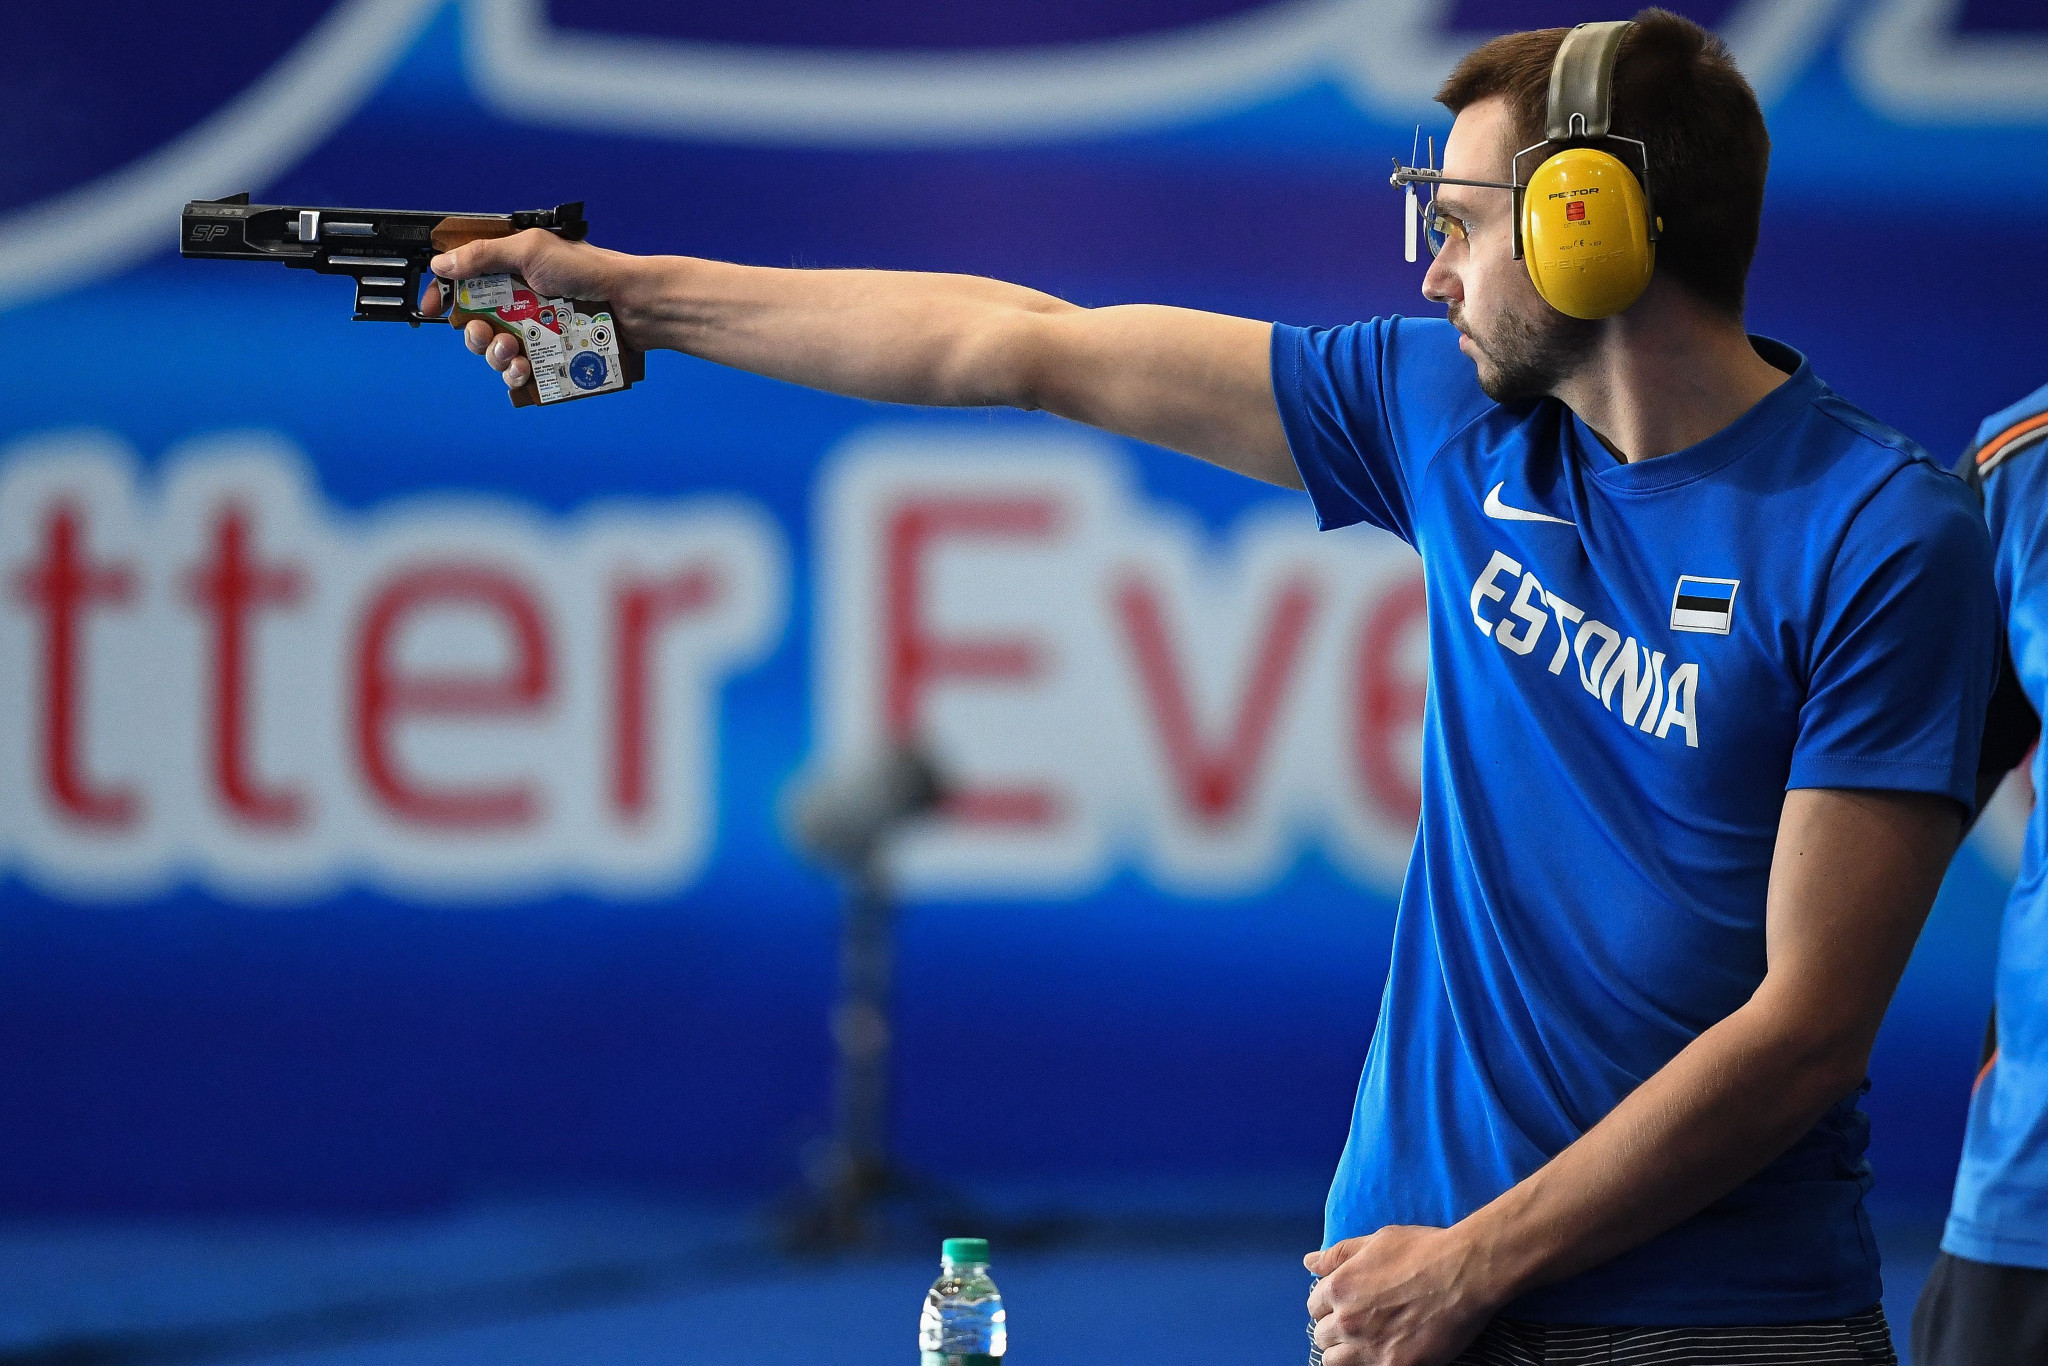 Olesk wins shoot-off to top pistol podium at ISSF World Cup